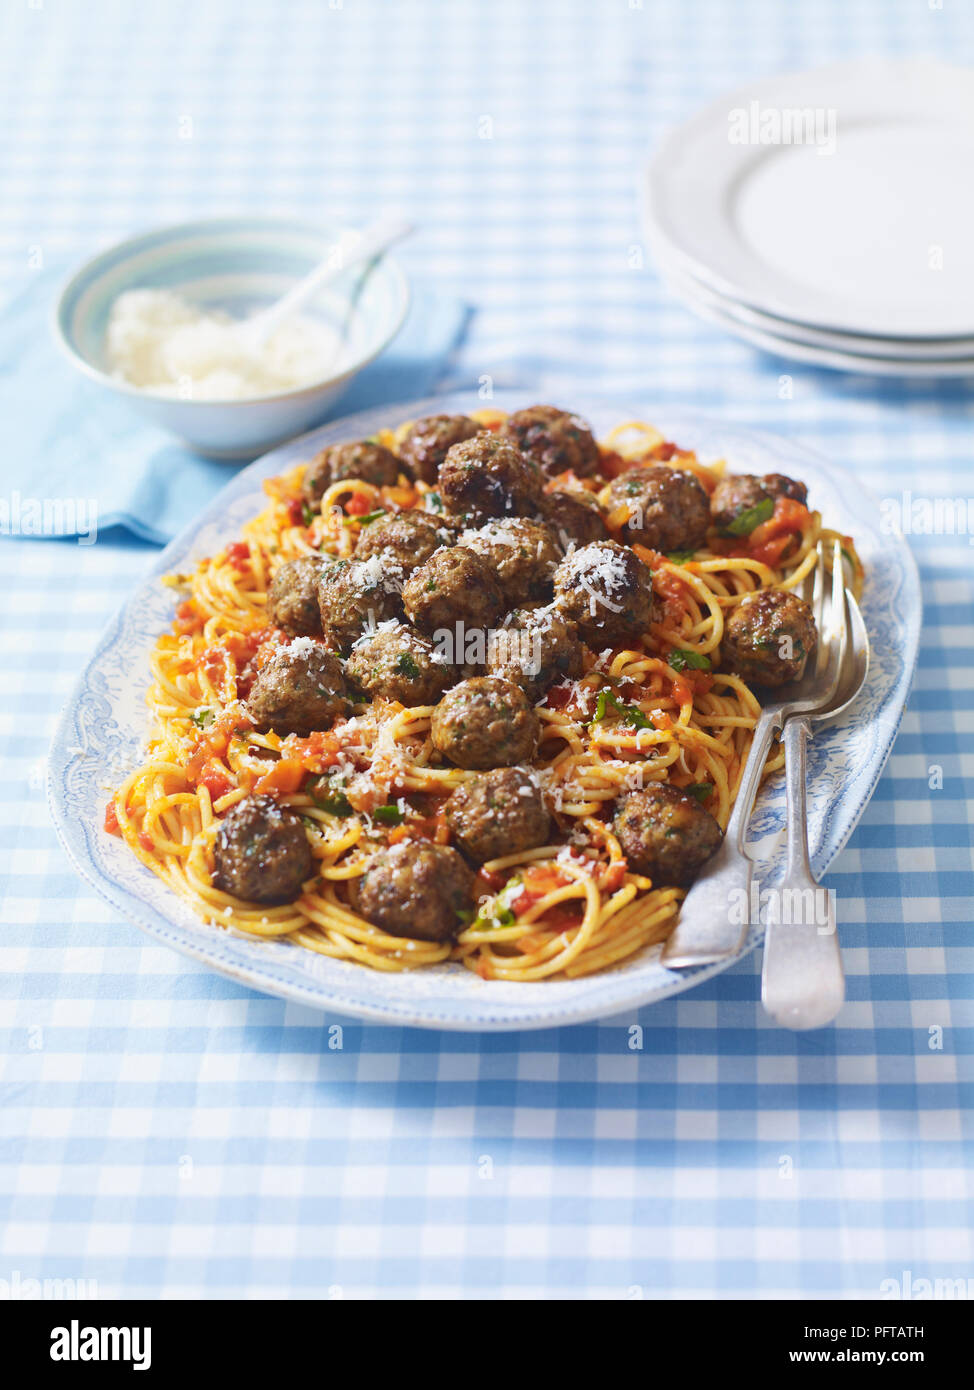 Spaghetti with meatballs and grated cheese Stock Photo